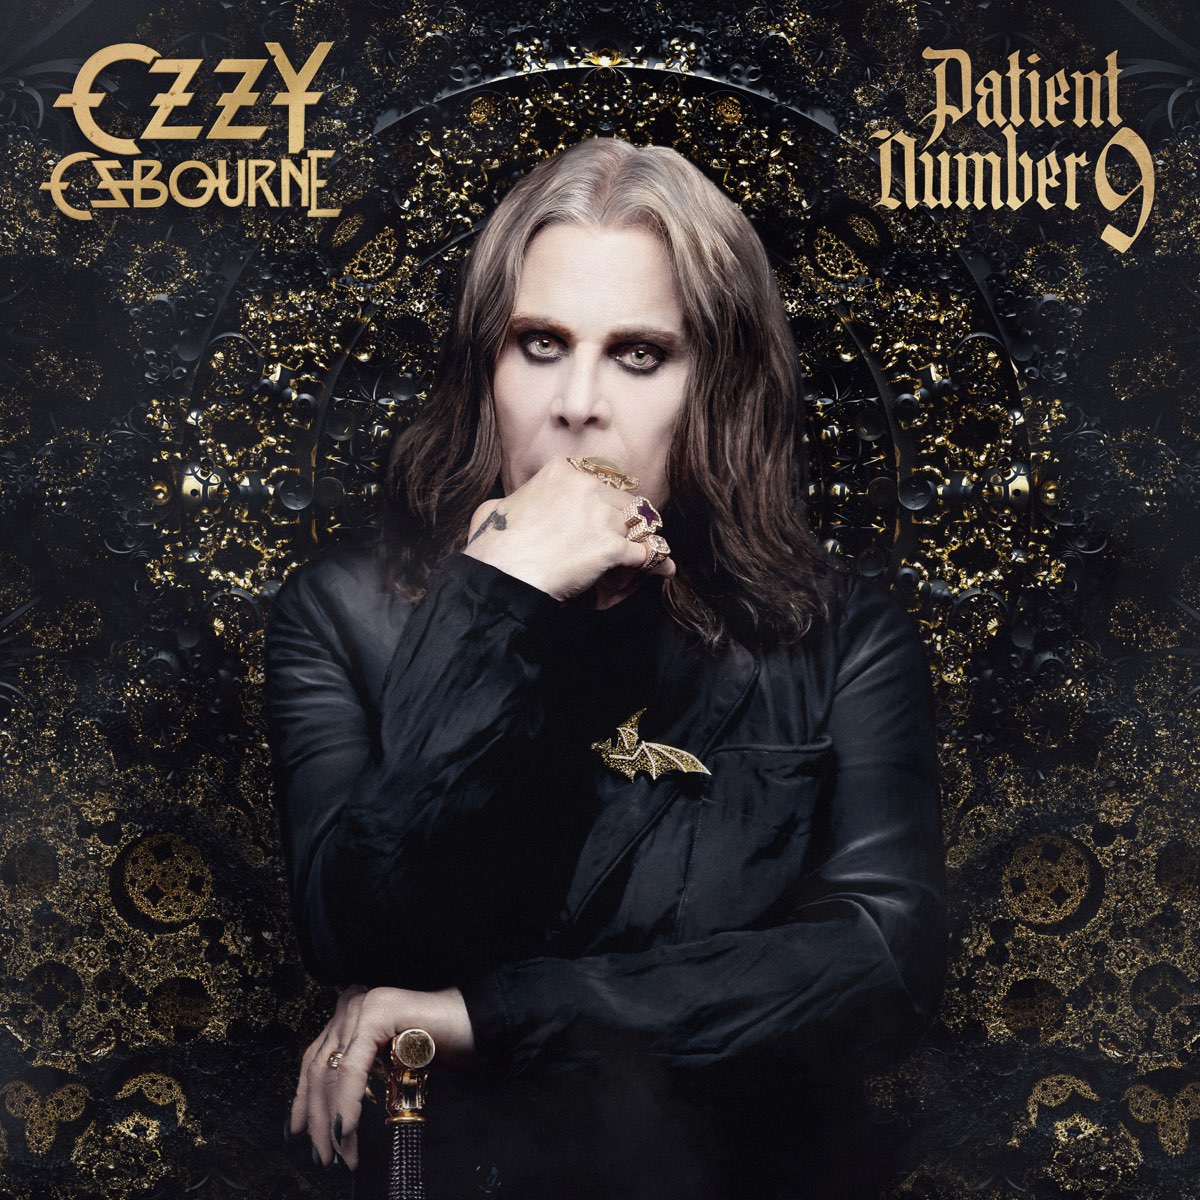 Patient Number 9 by Ozzy Osbourne on Apple Music